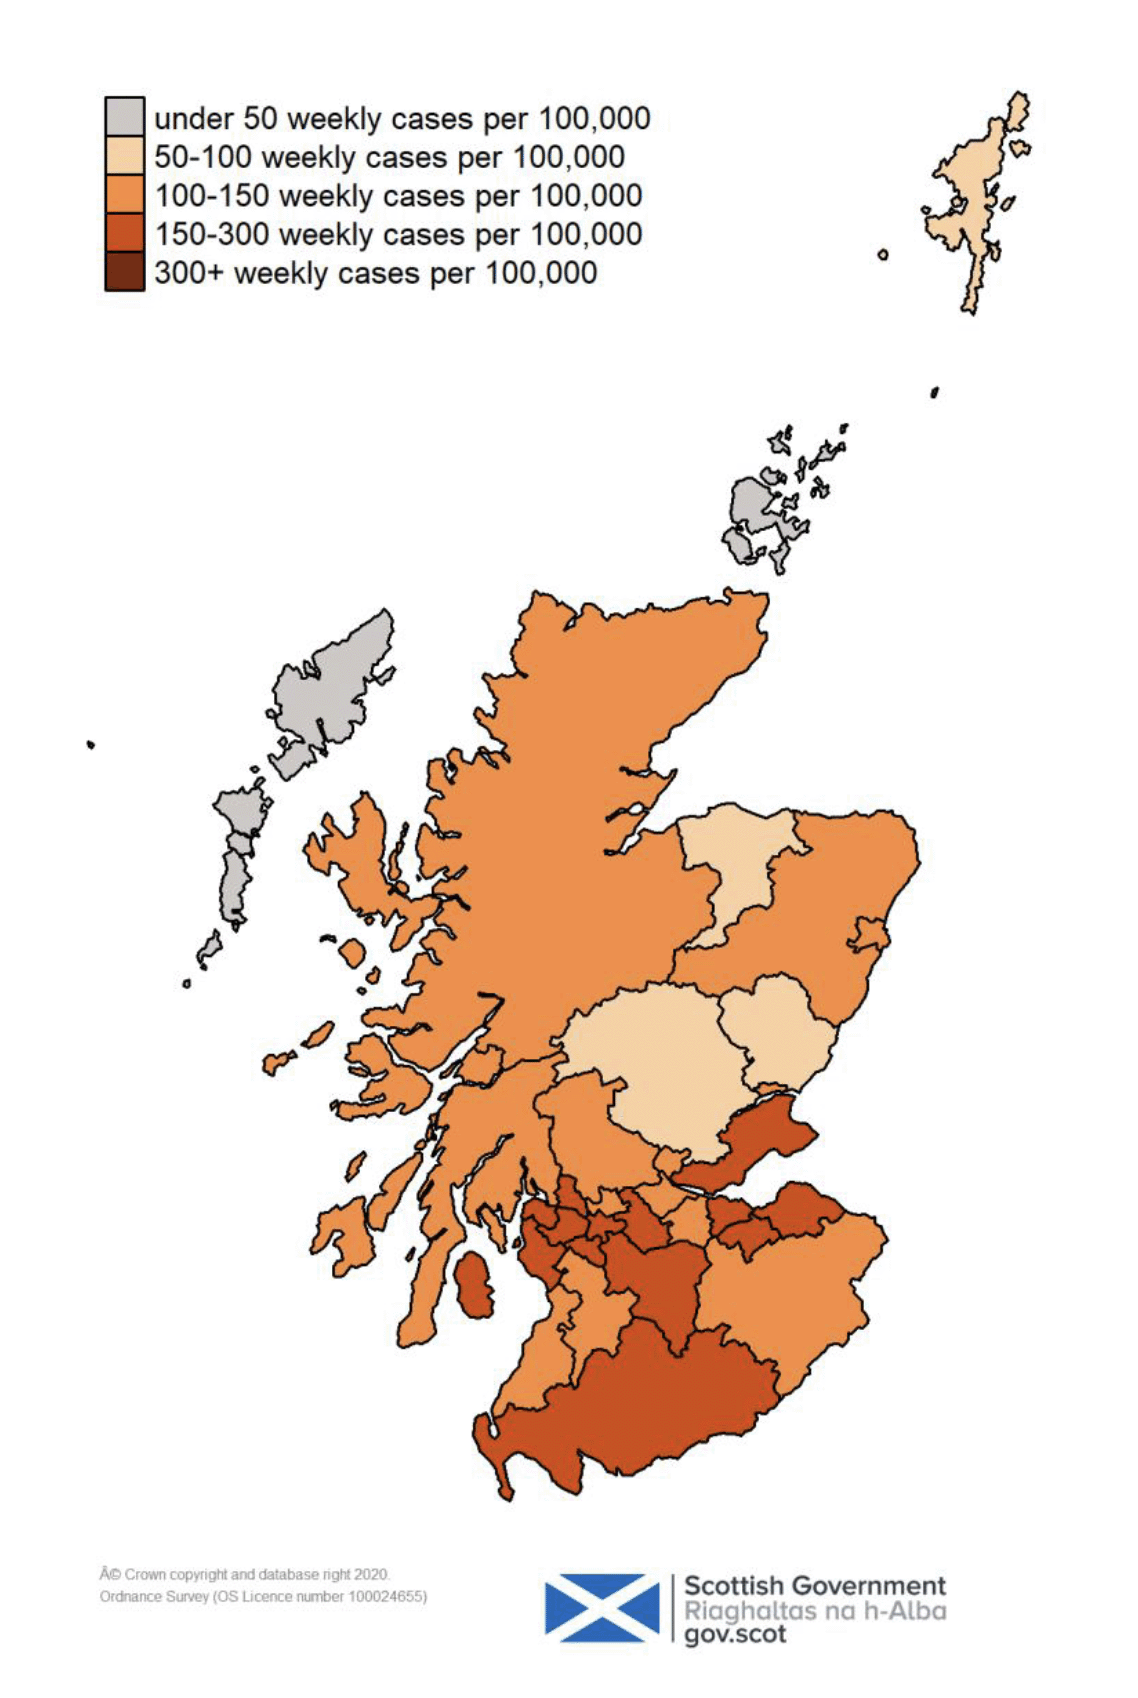 This colour coded map of Scotland shows the different rates of weekly positive cases per 100,000 people across Scotland’s Local Authorities. The colours range from grey for under 50 weekly cases per 100,000, through very light orange for 50 to 100, orange for 100-150, darker orange for 150-300, and very dark orange for over 300 weekly cases per 100,000 people. 
There are no local authorities showing as very dark orange on the map, with over 300 weekly cases. Orkney and Na h-Eileanan Siar are shown as grey, with under 50 weekly cases per 100,000 people. Angus, Moray, Perth and Kinross and Shetland are shown as very light orange with 50 to 100 weekly cases per 100,000 population. Edinburgh, Dumfries and Galloway, East Lothian, East Renfrewshire, Fife, Glasgow, Inverclyde, Midlothian, North Ayrshire, North Lanarkshire, Renfrewshire, South Lanarkshire and West Dunbartonshire are showing as darker orange with 150-300 weekly cases. All other local authorities are shown as orange with 100-150 weekly cases per 100,000.
